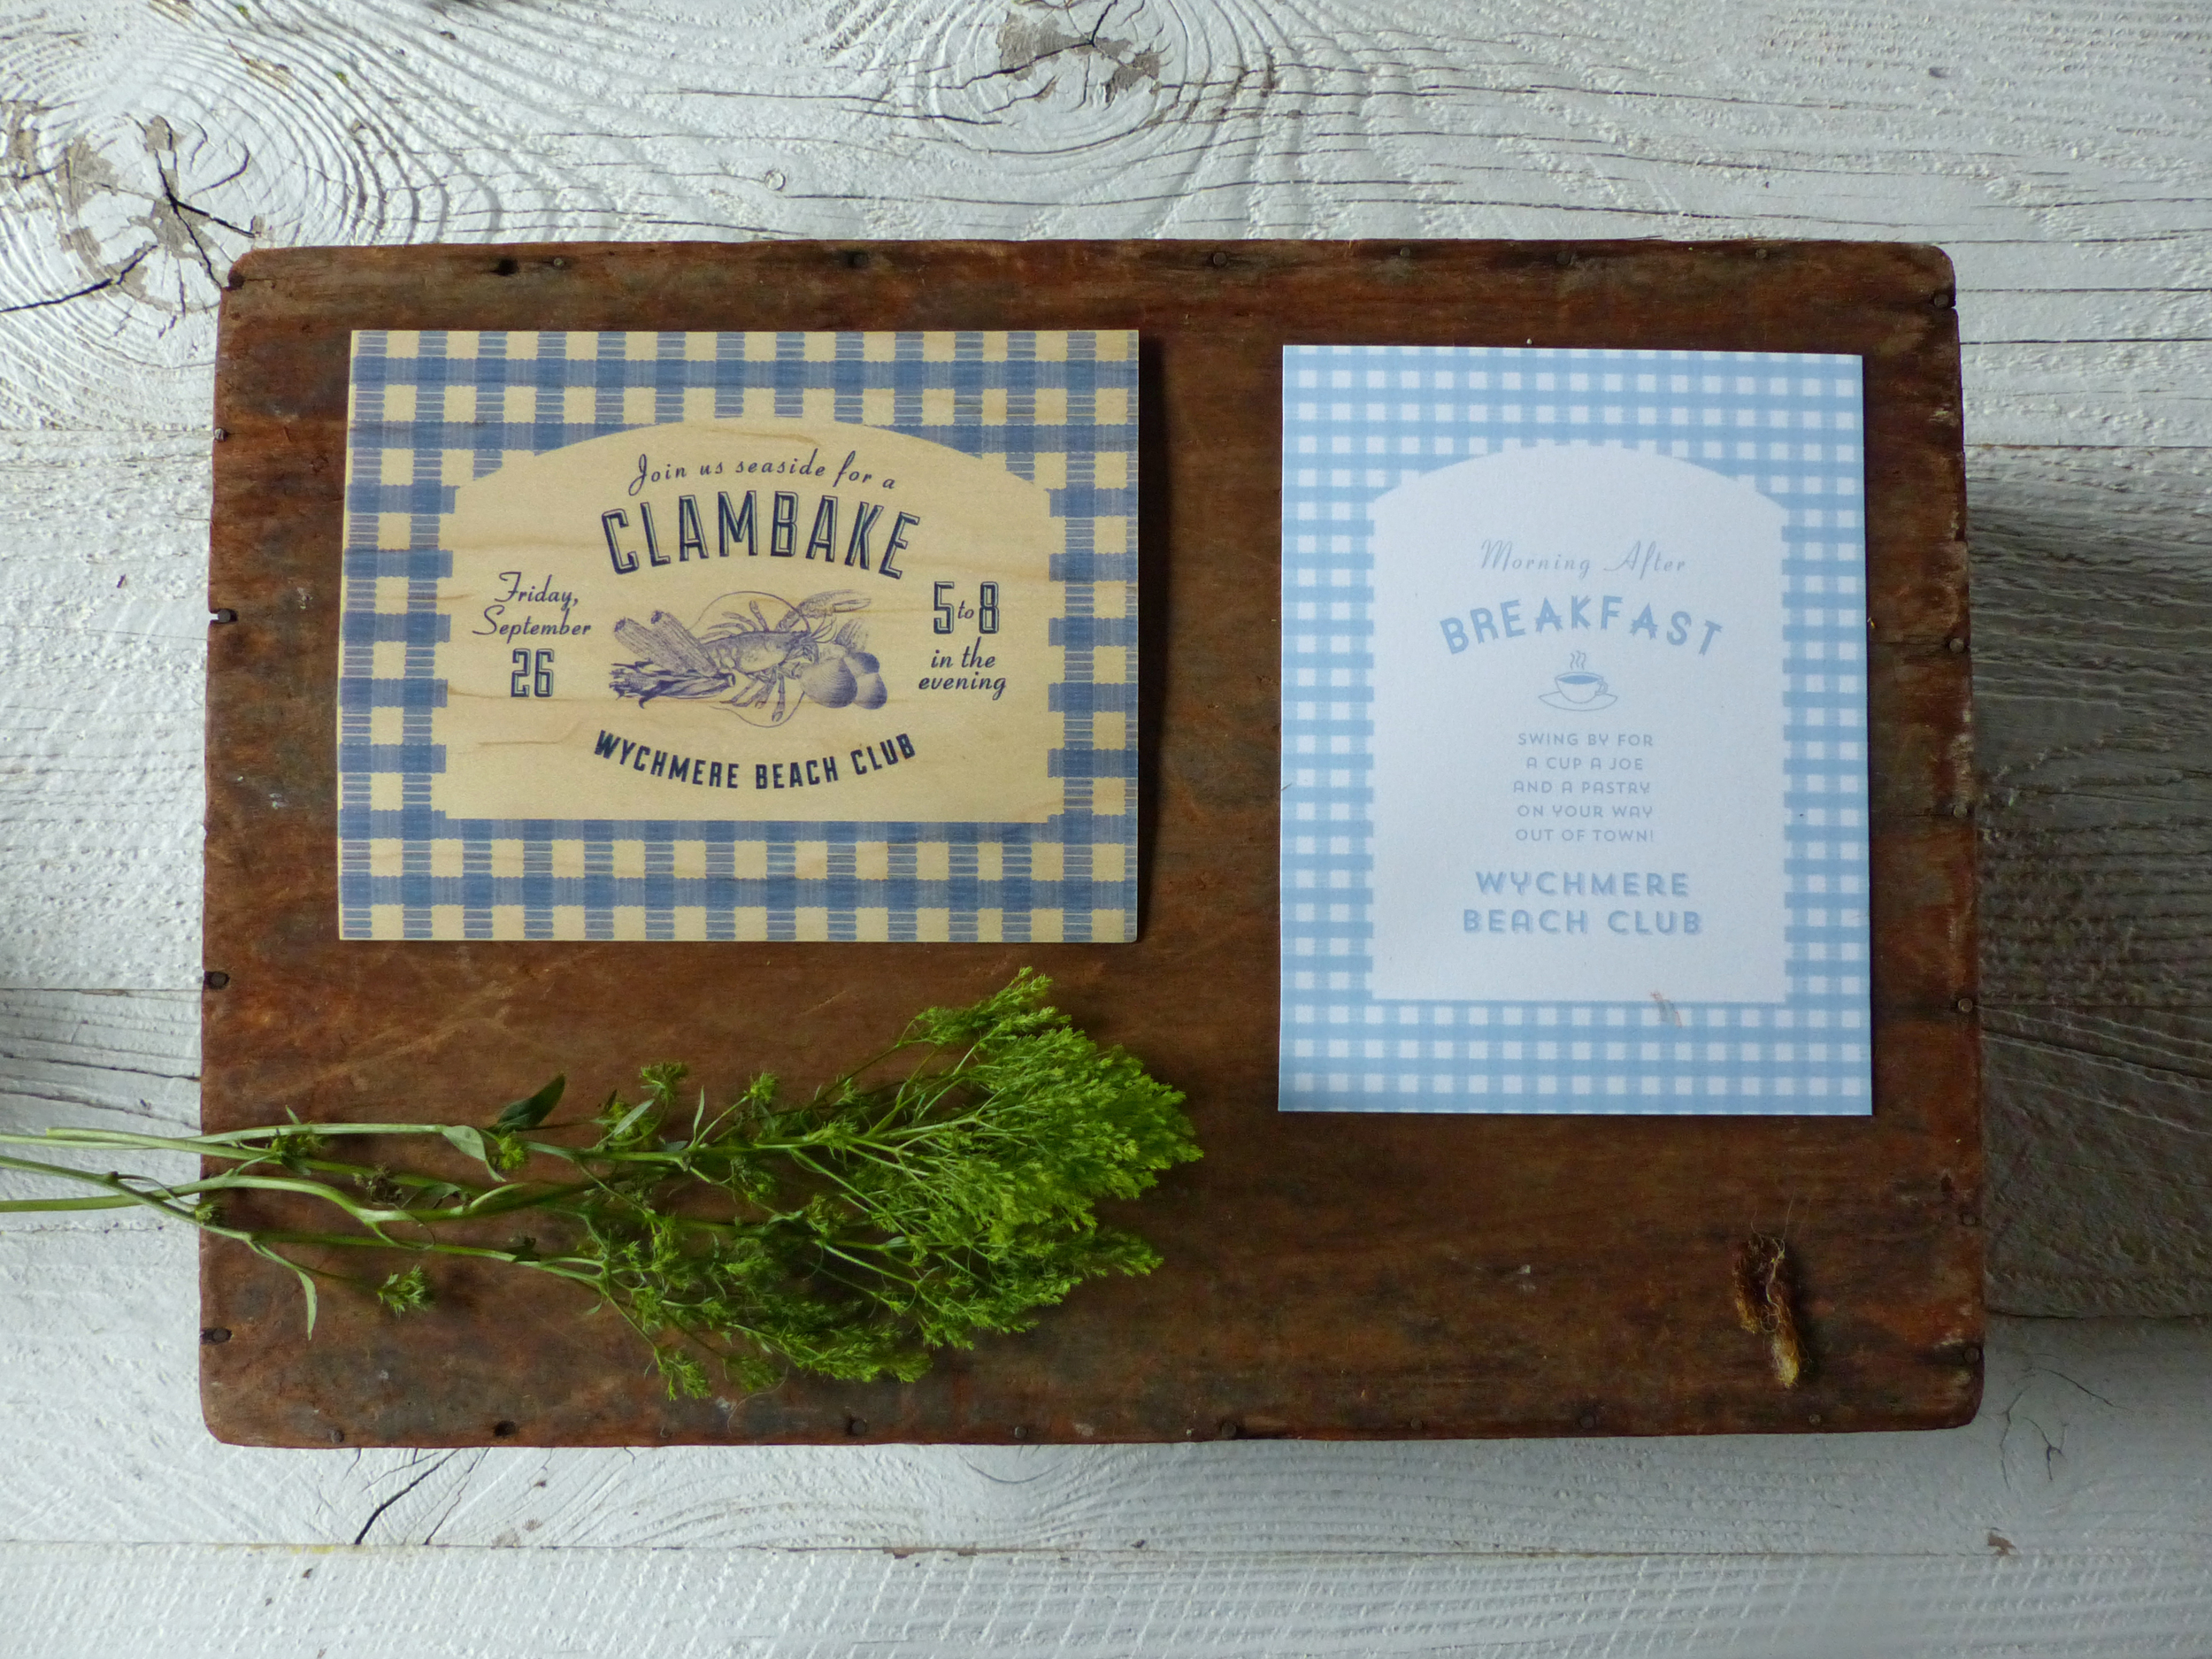  Cute blue&nbsp;gingham is used on the cards for the other weekend events, a Friday Night Clambake on the beach and a diner style breakfast on Sunday.&nbsp; 